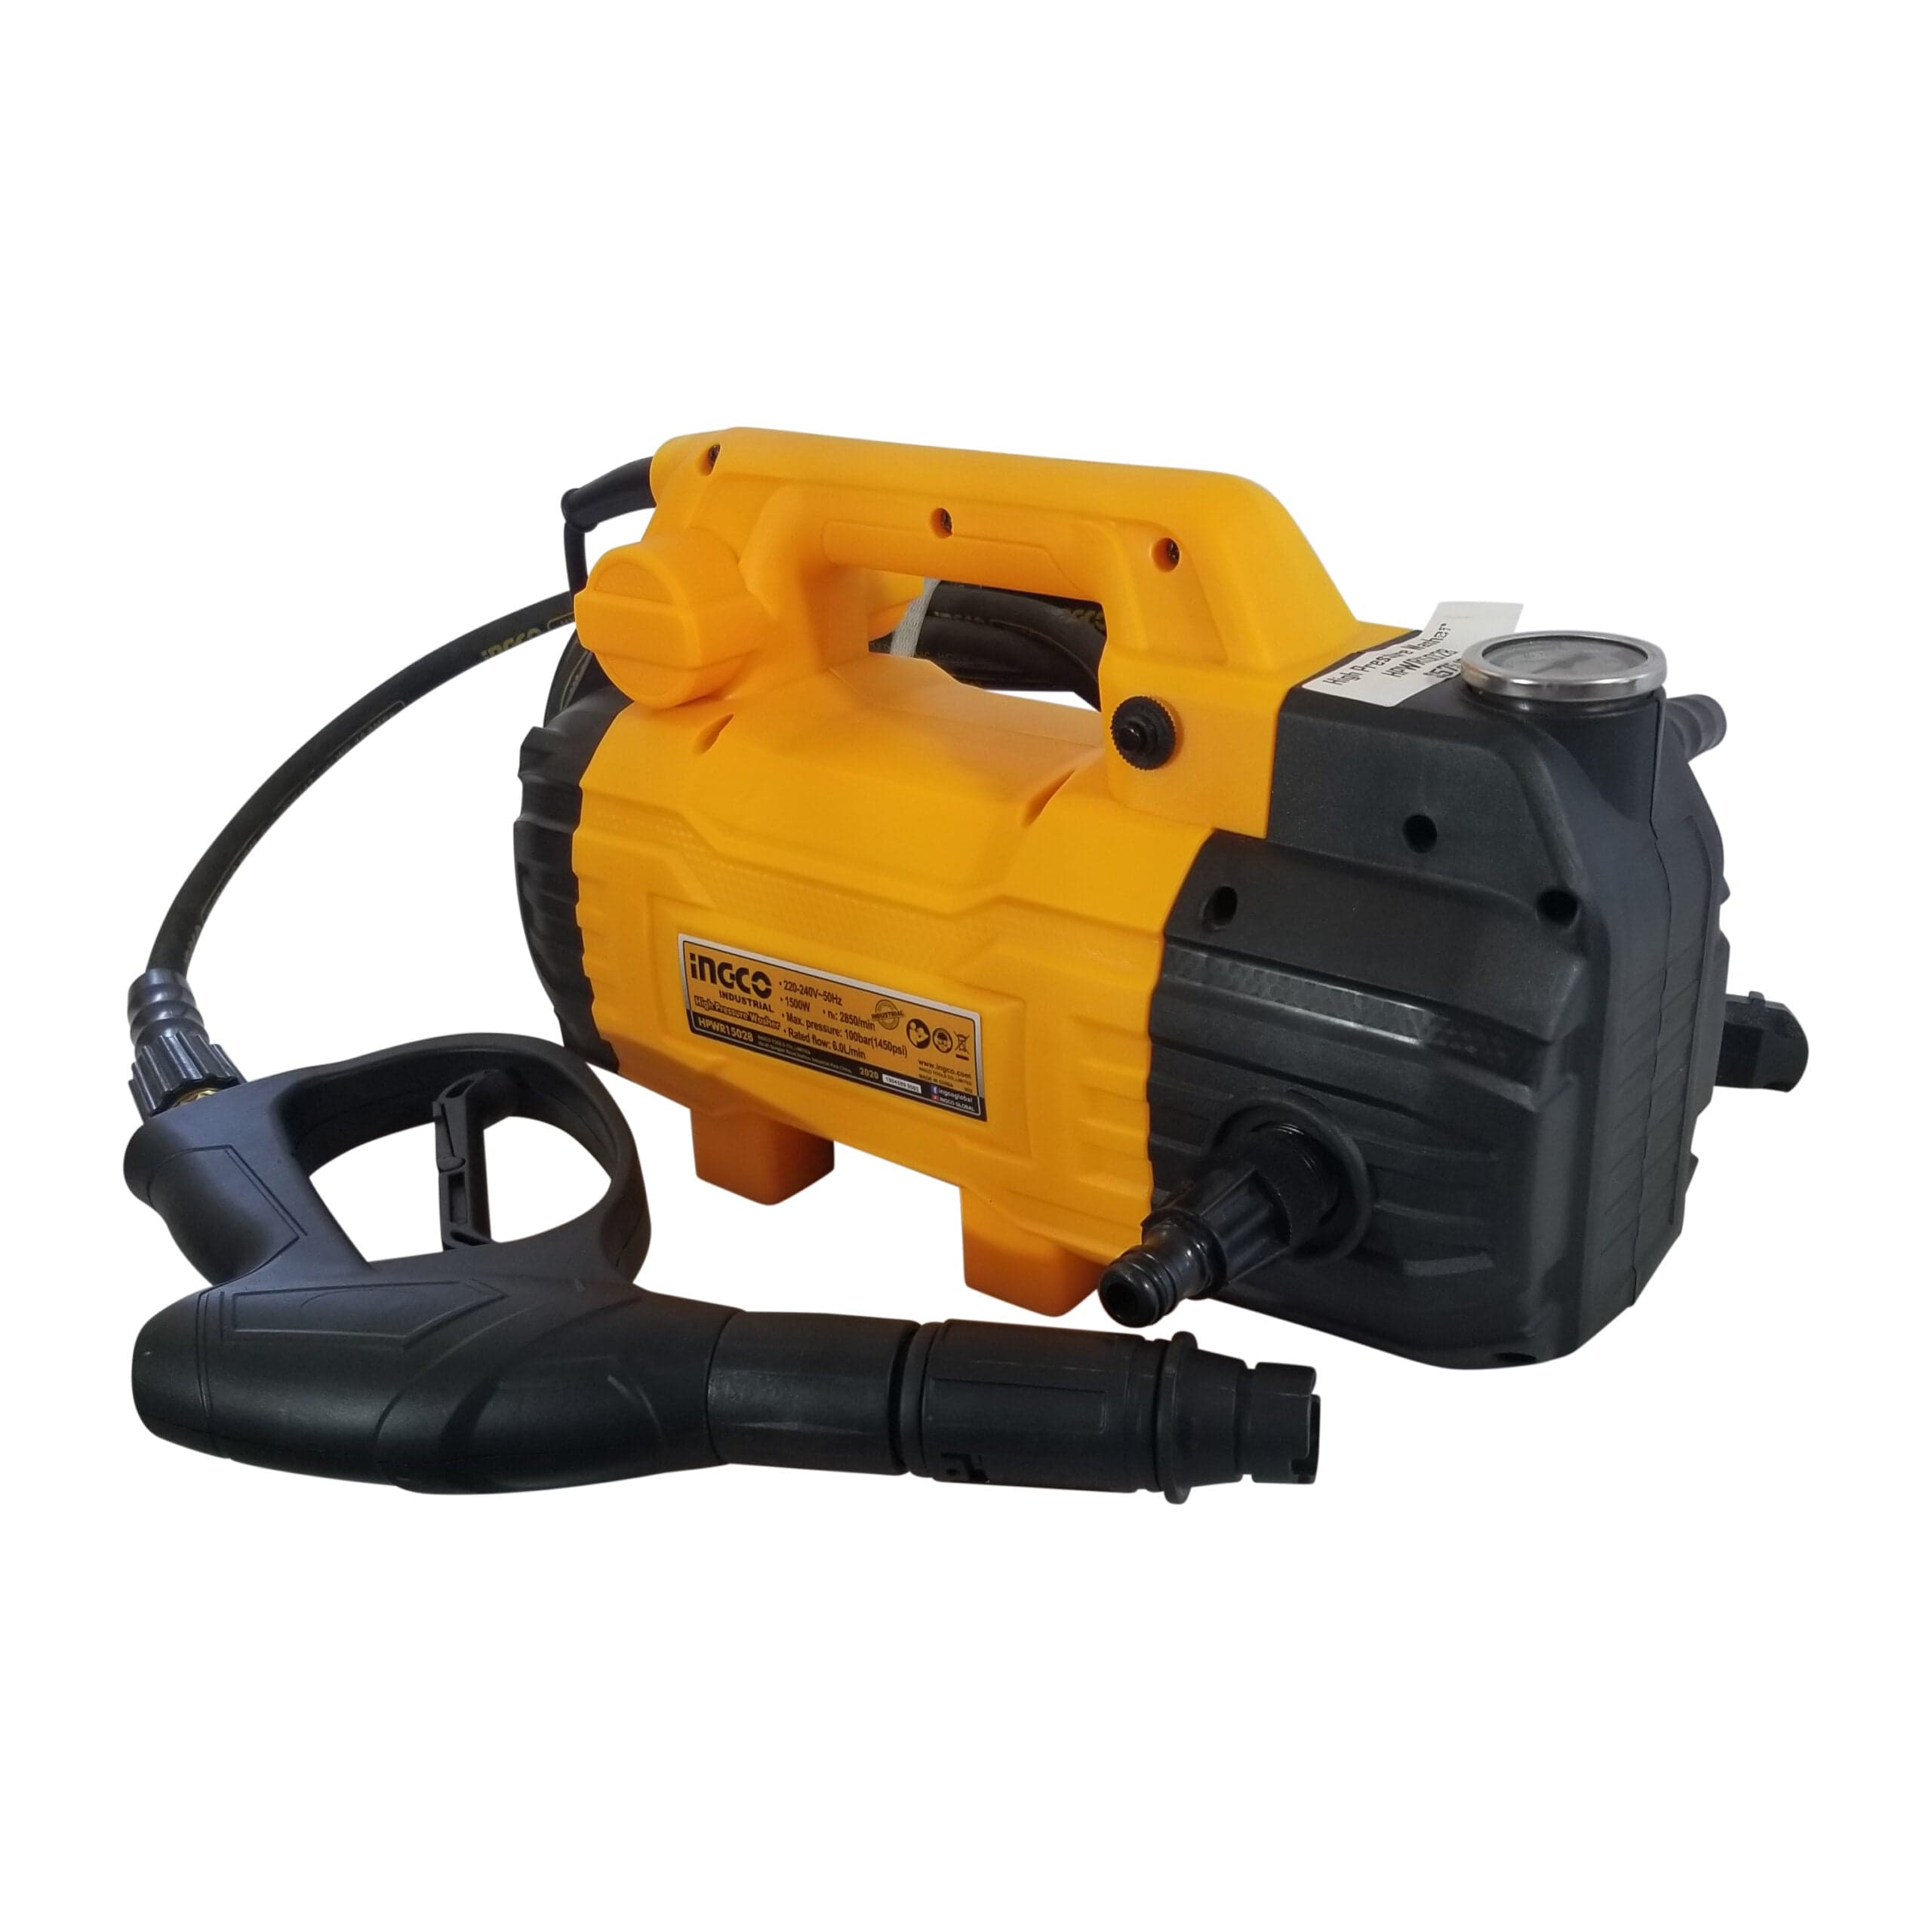 Ingco High Pressure Washer 1500W 100Bar - HPWR15028 | Supply Master | Accra, Ghana Pressure Washer Buy Tools hardware Building materials